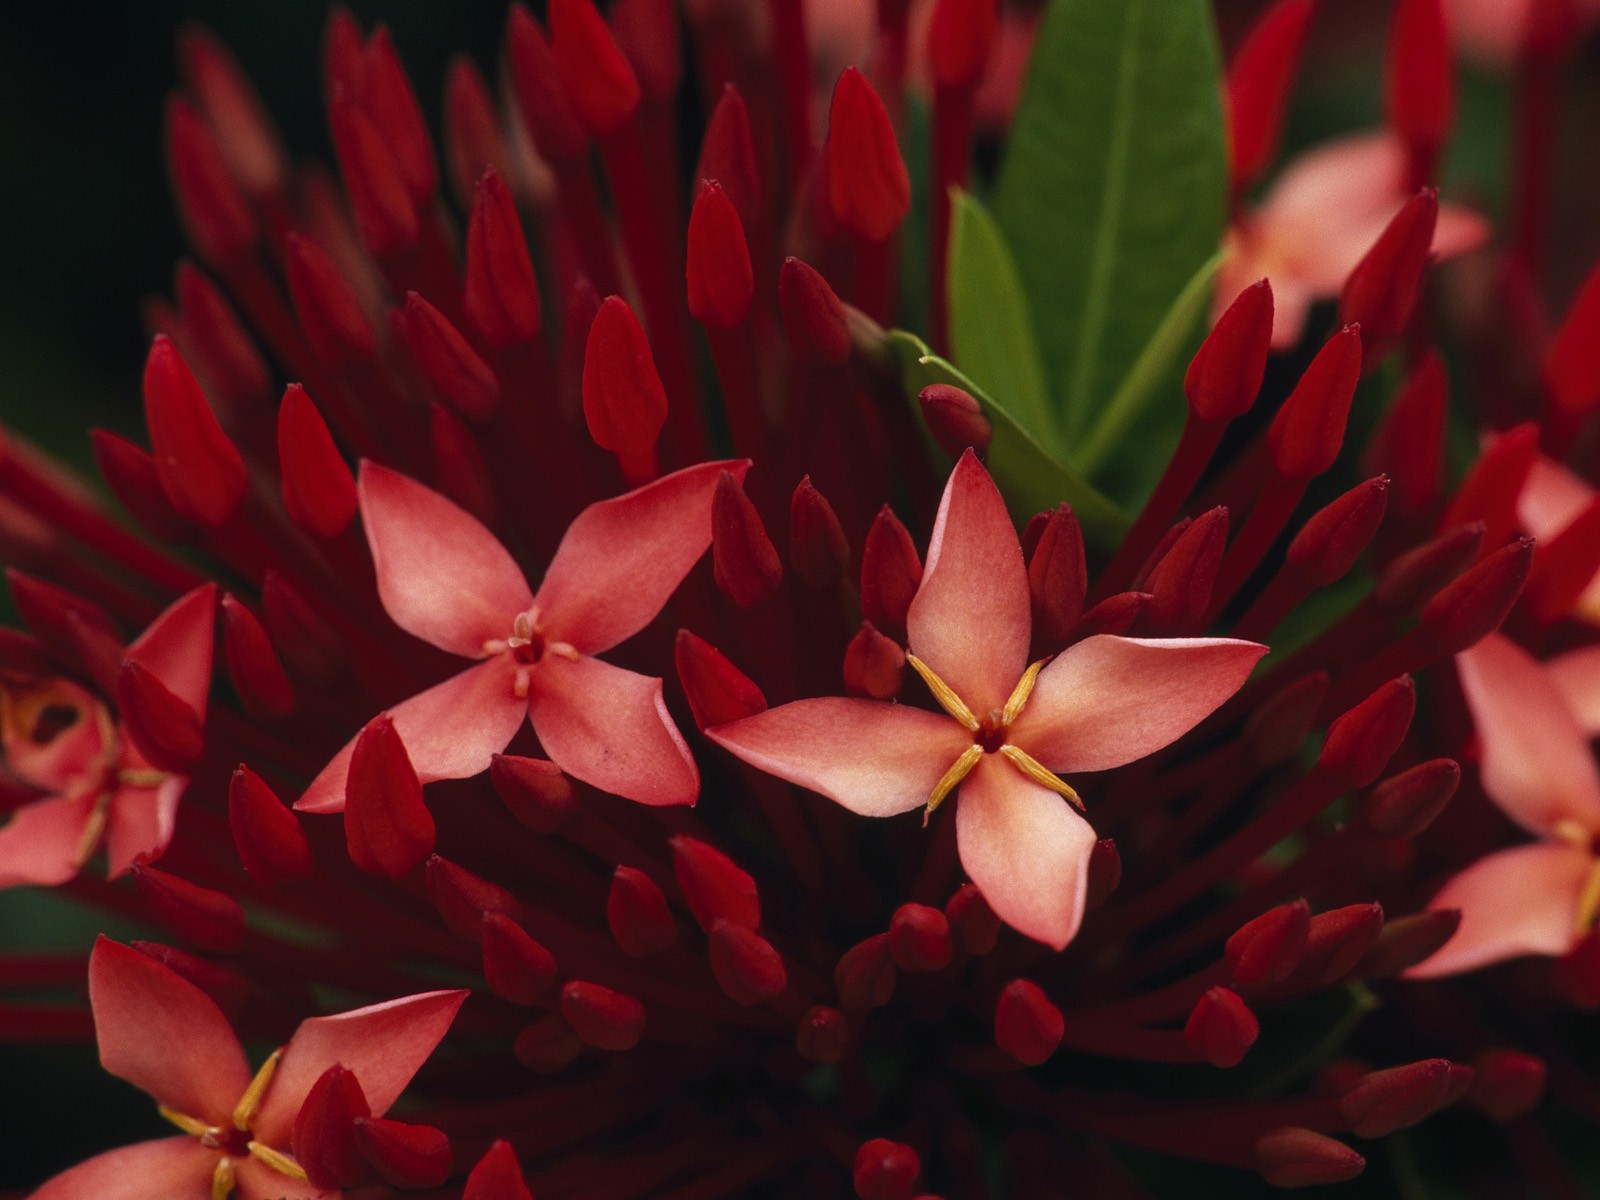 Flowers: Red Jungle Flowers Flame Flower Hd Photo for HD 16:9 High ...